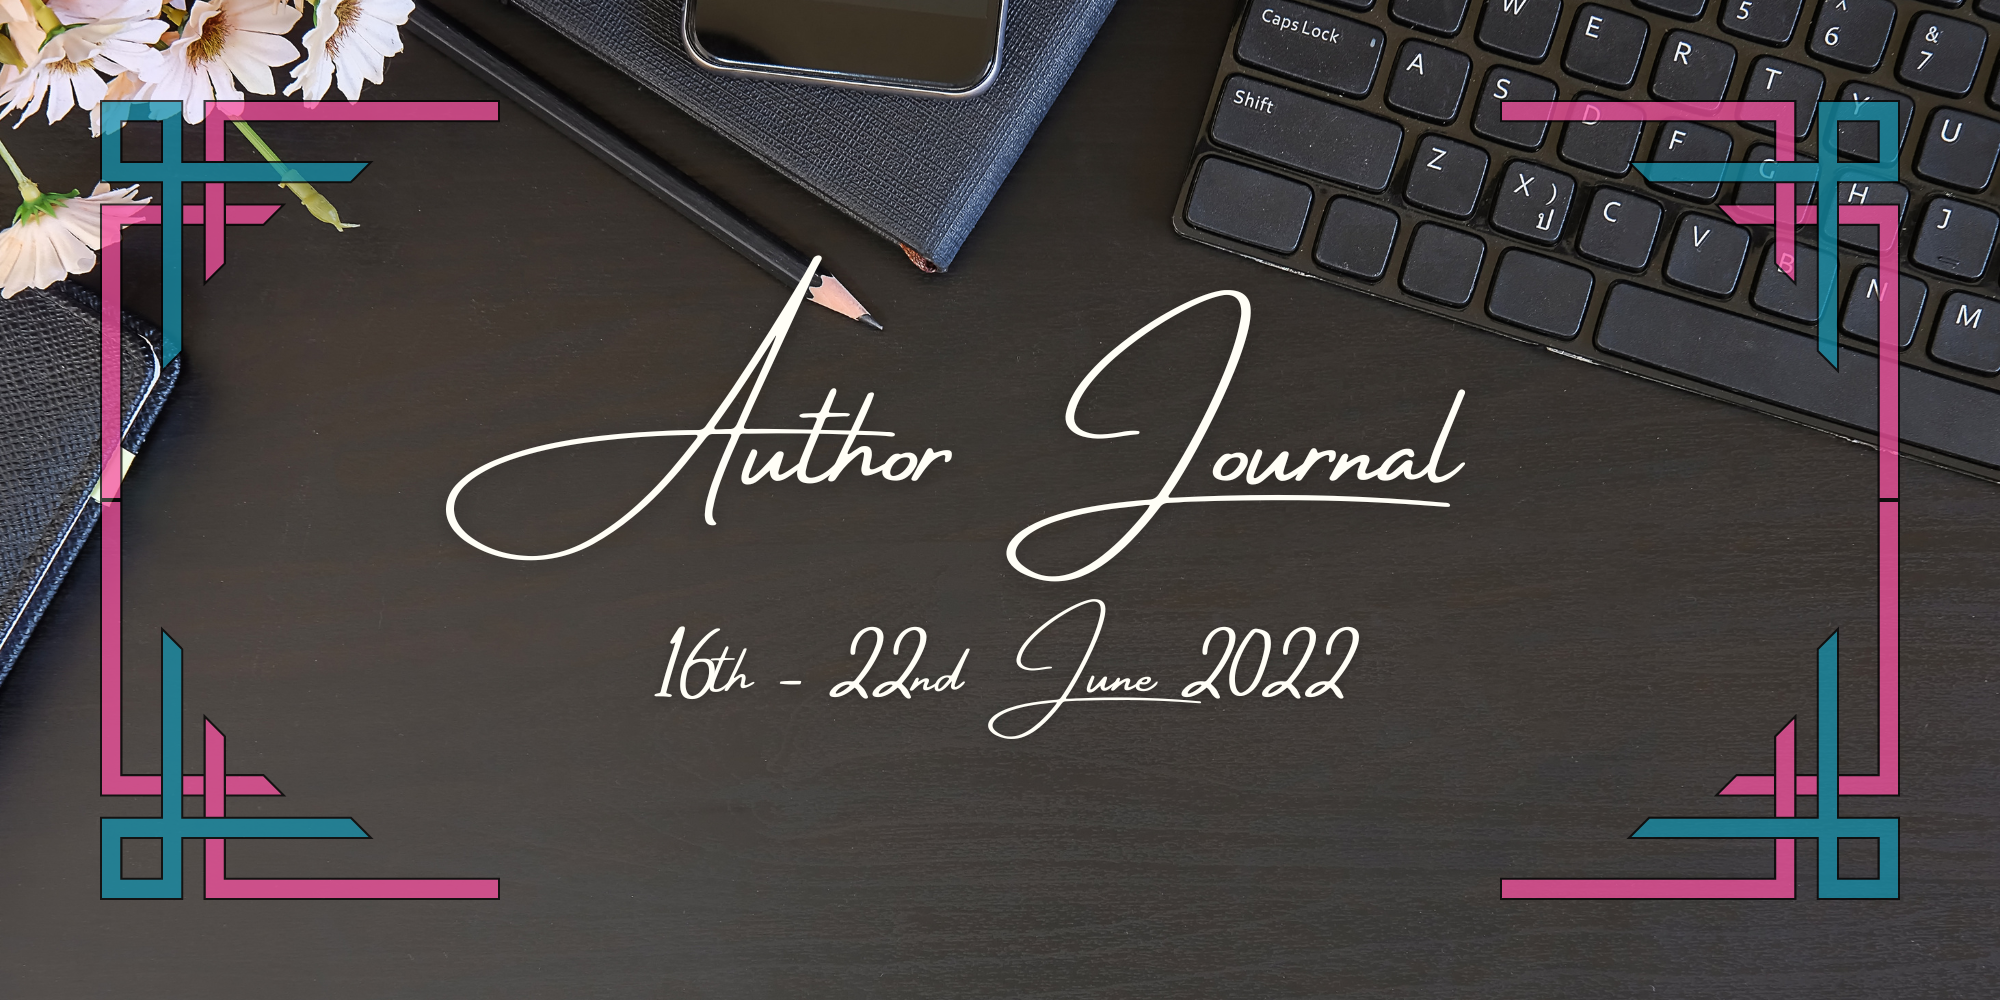 Author Journal 16th – 22nd June 2022